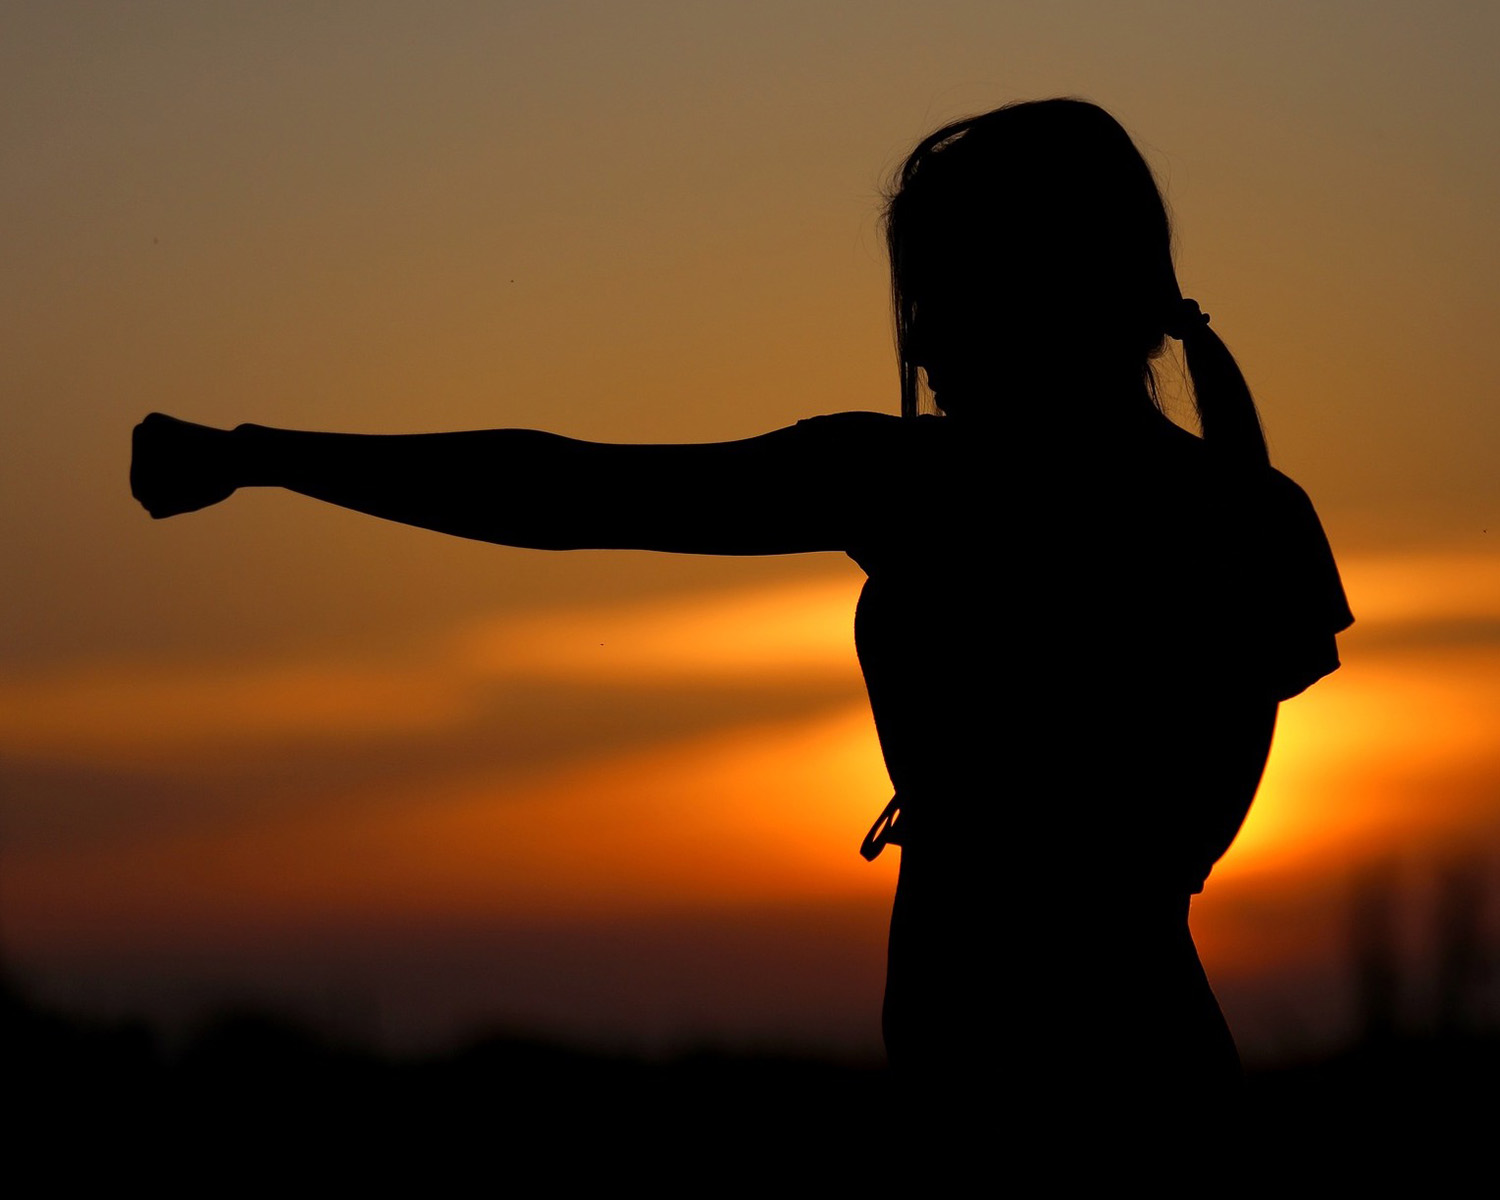 Female figure practicing punches during sunset